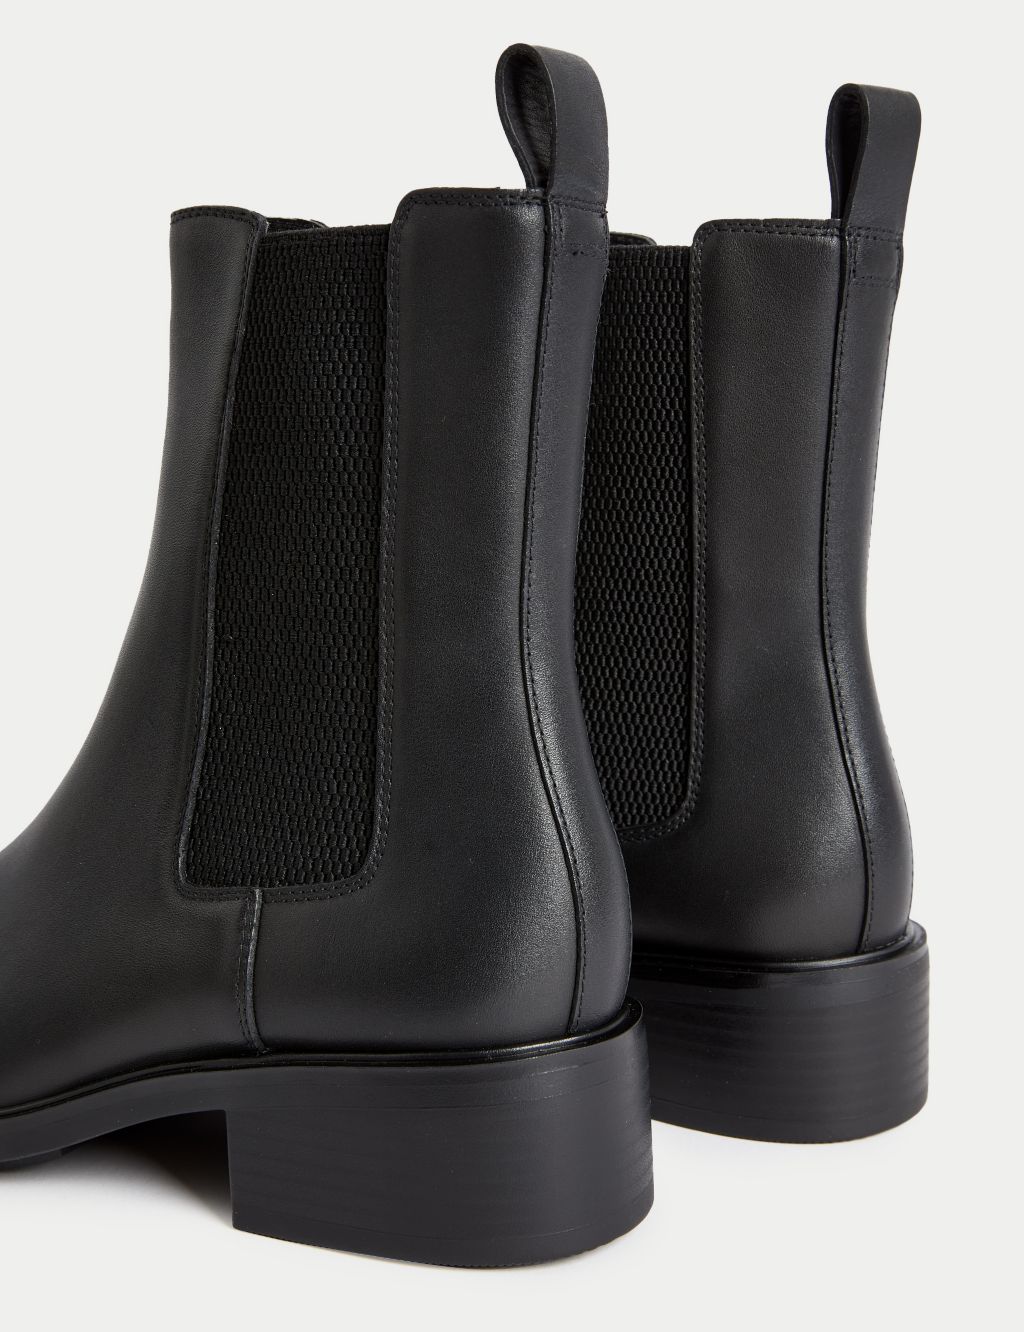 Leather Chelsea Chisel Toe Boots image 3